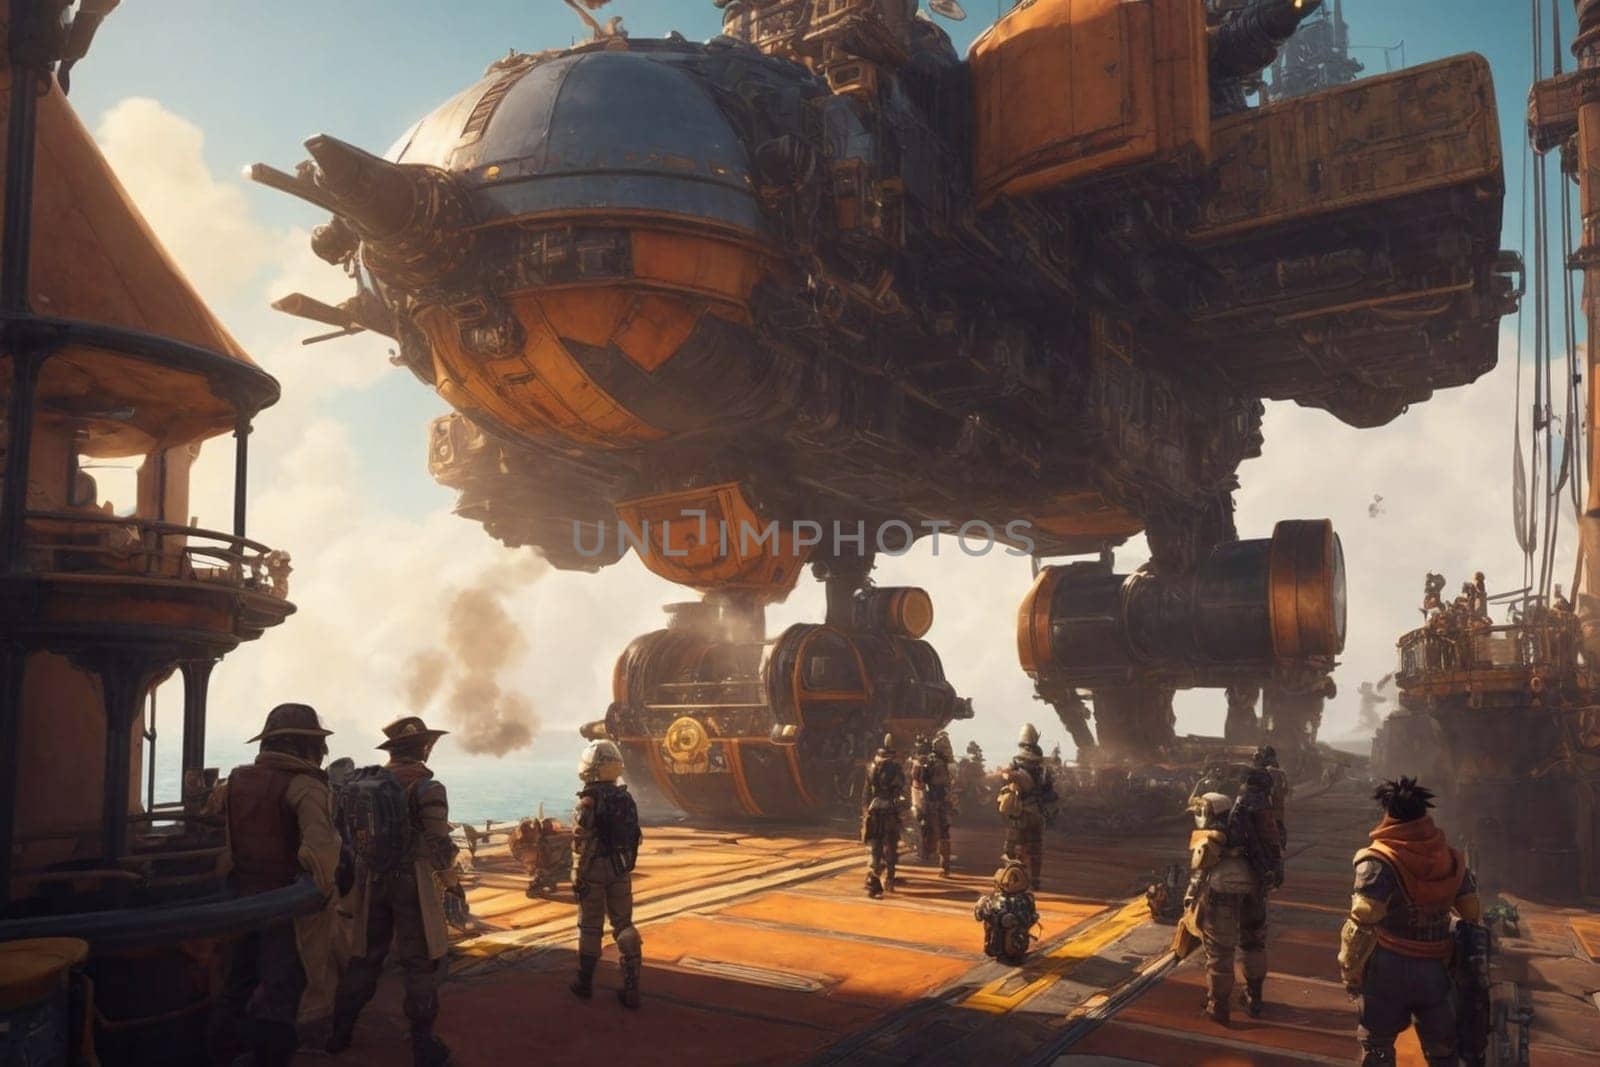 A photograph showcasing a dynamic and futuristic sci-fi scene with numerous replicating figures in action.